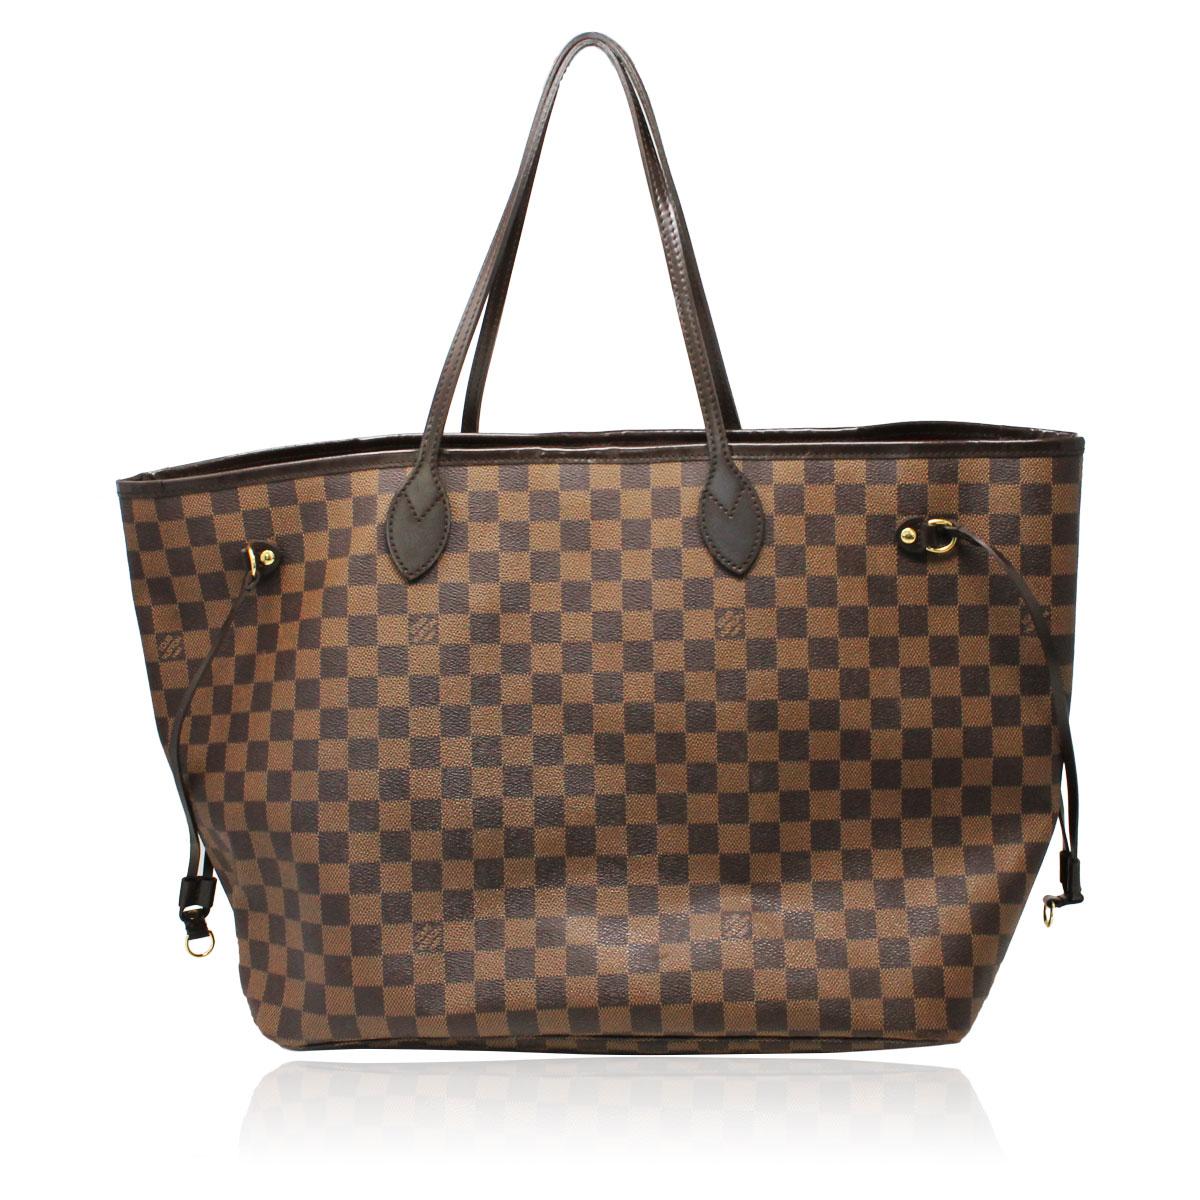 Brand: Louis Vuitton
Style: Tote
Handles: Brown Cowhide Leather Shoulder Straps, Drop:8